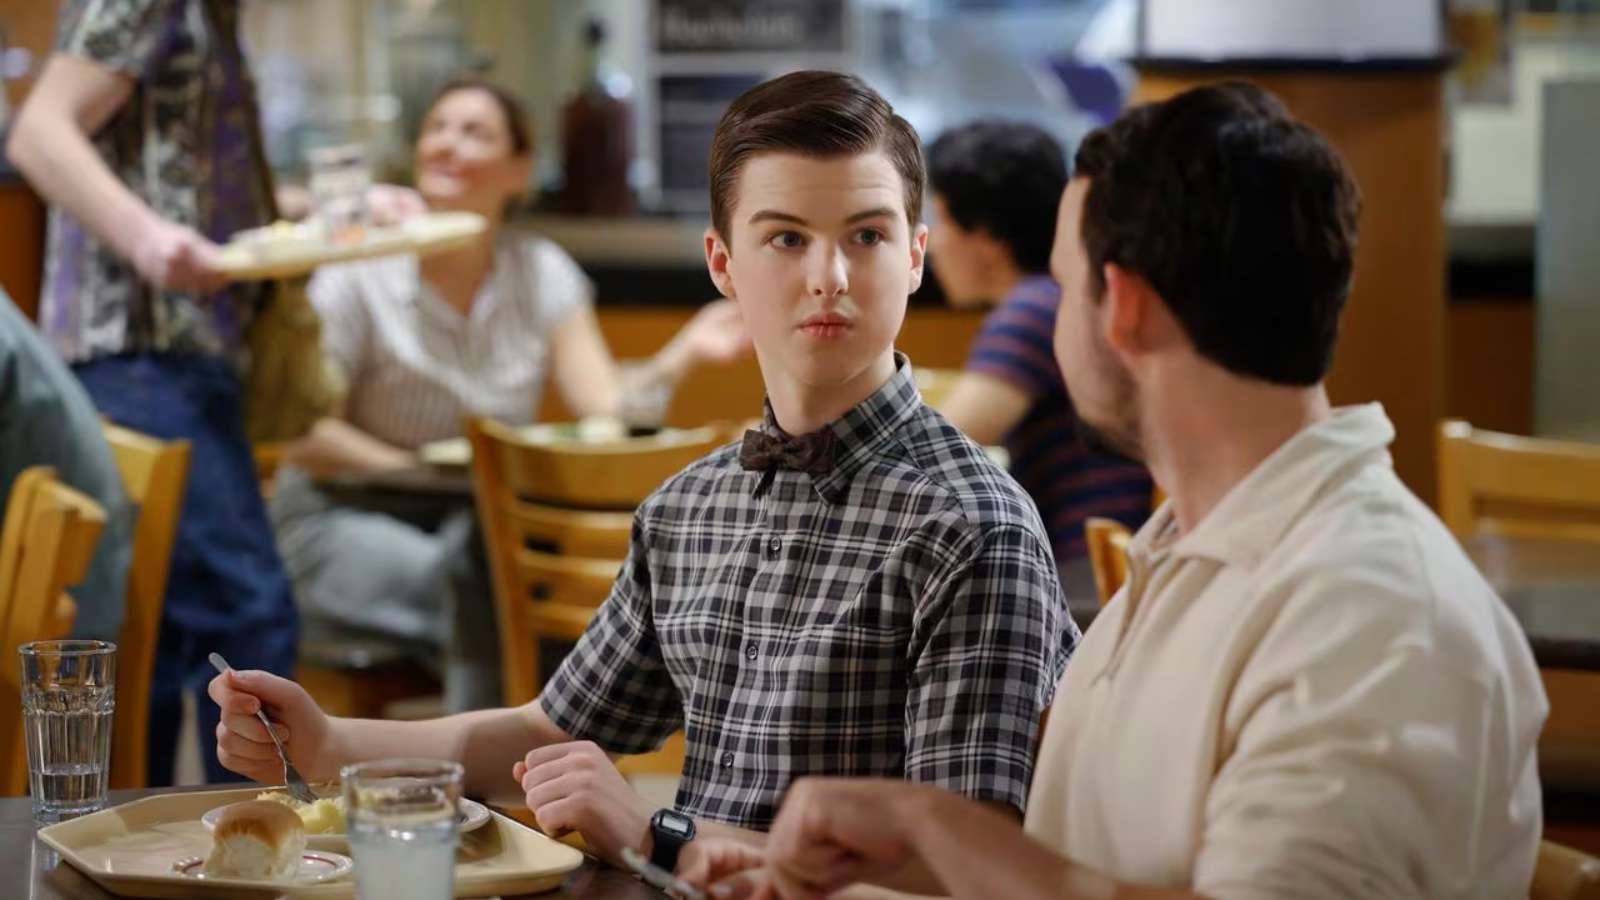 Sheldon Cooper in Young Sheldon in cafeteria